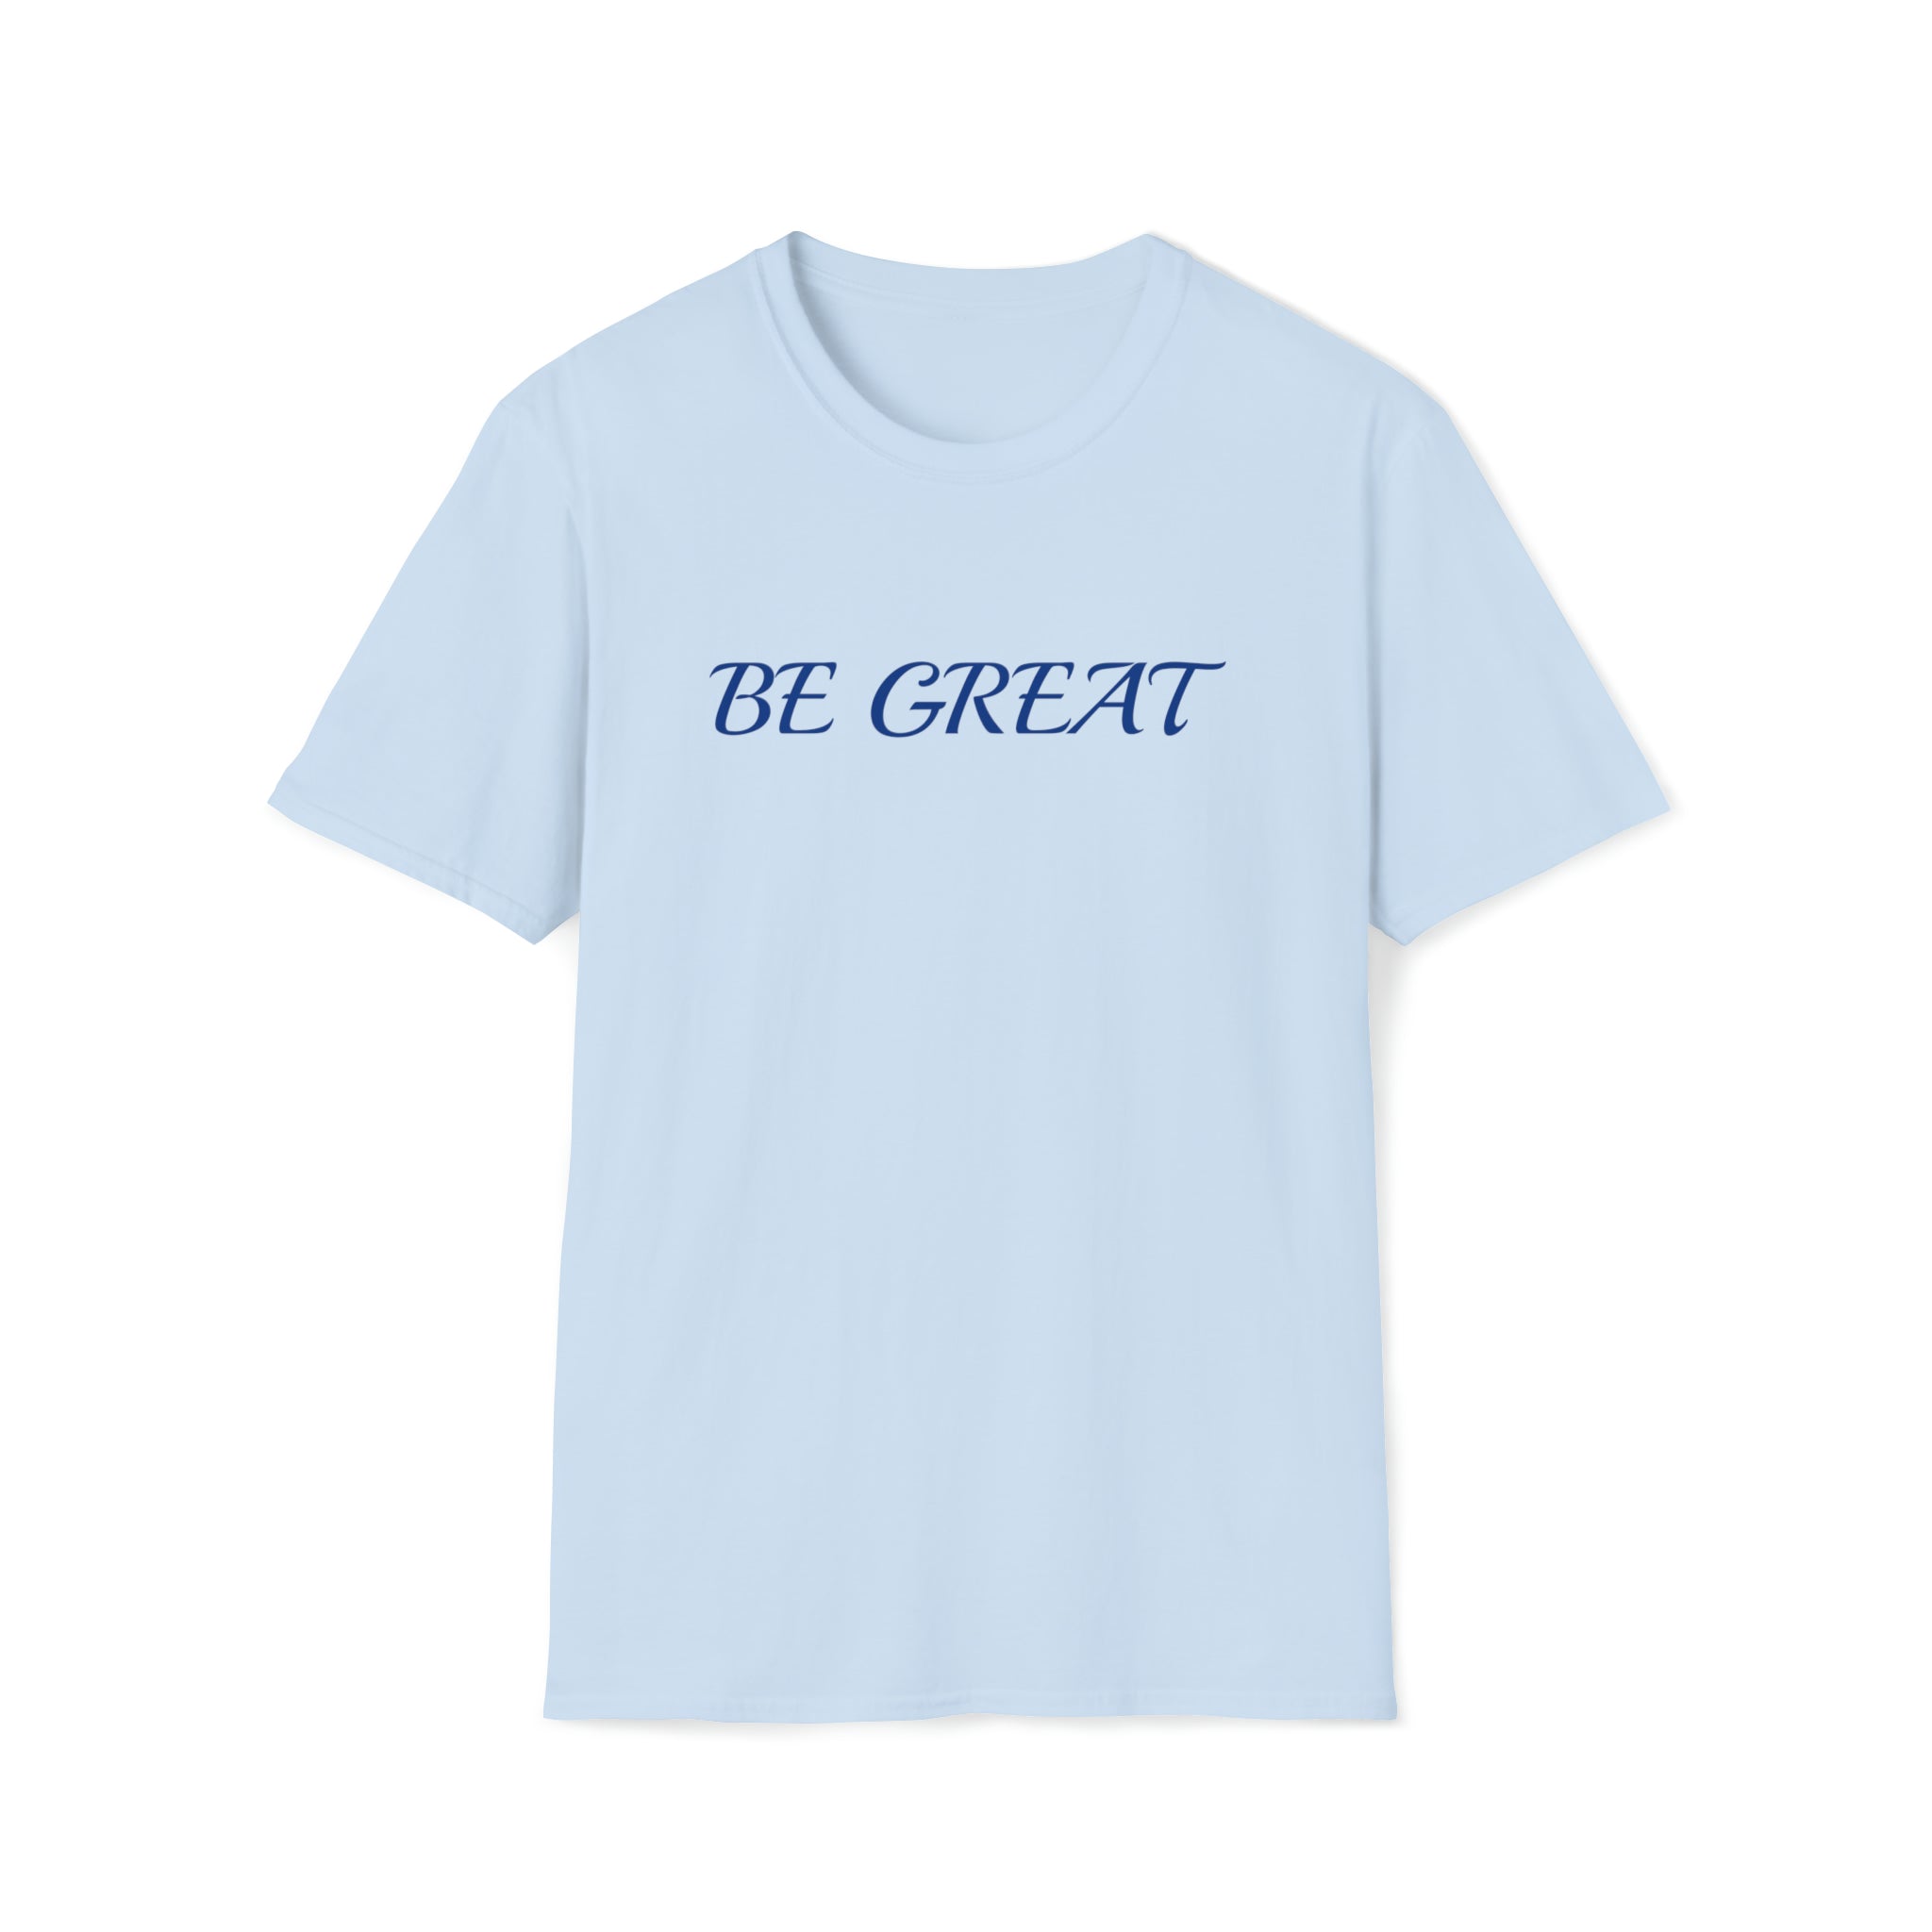 Be great T-Shirt